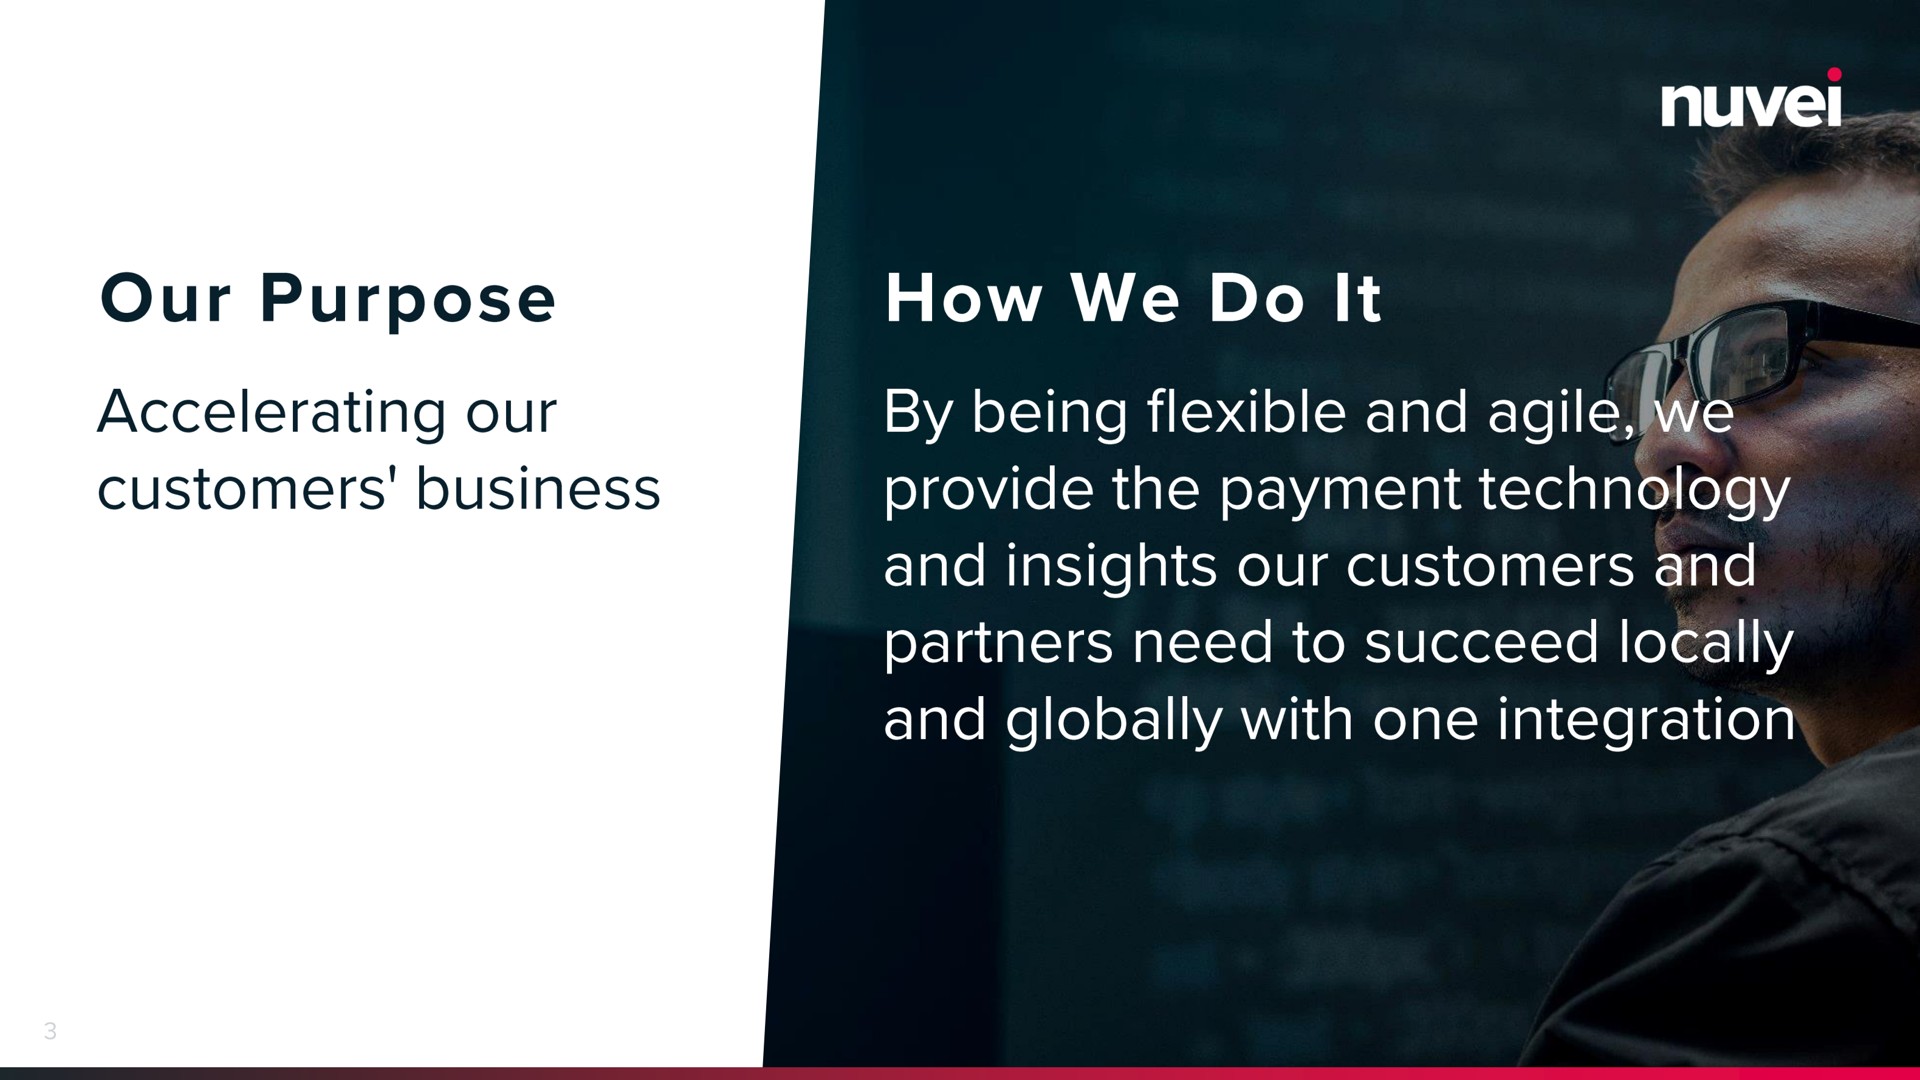 our purpose how we do it accelerating our customers business by being flexible and agile provide the payment technology and insights our customers and partners need to succeed locally and globally with one integration | Nuvei